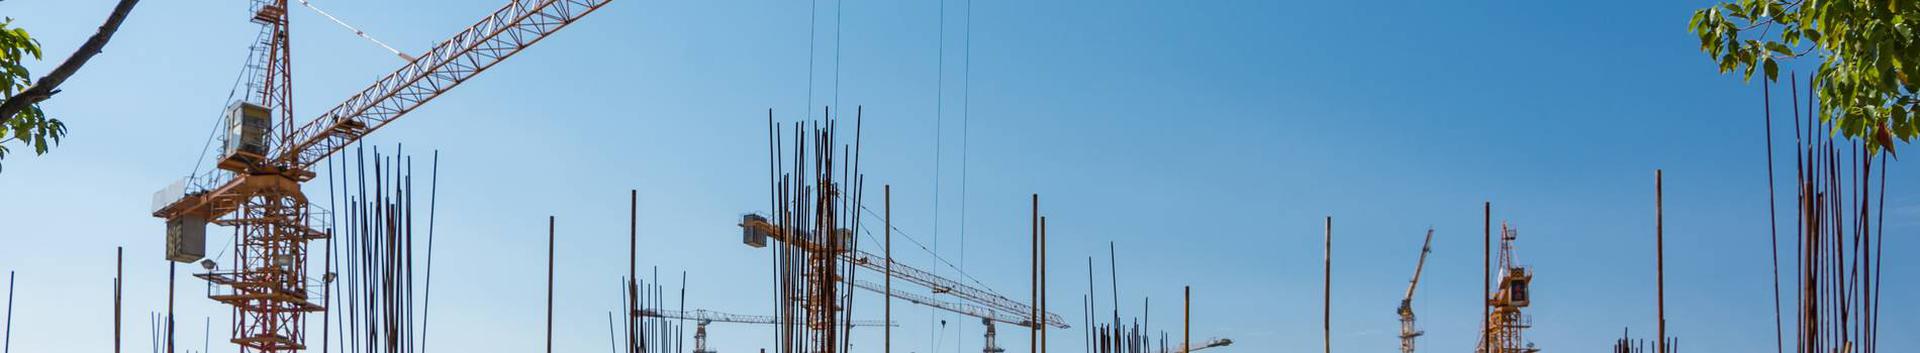 Construction and other related services, products, consultations